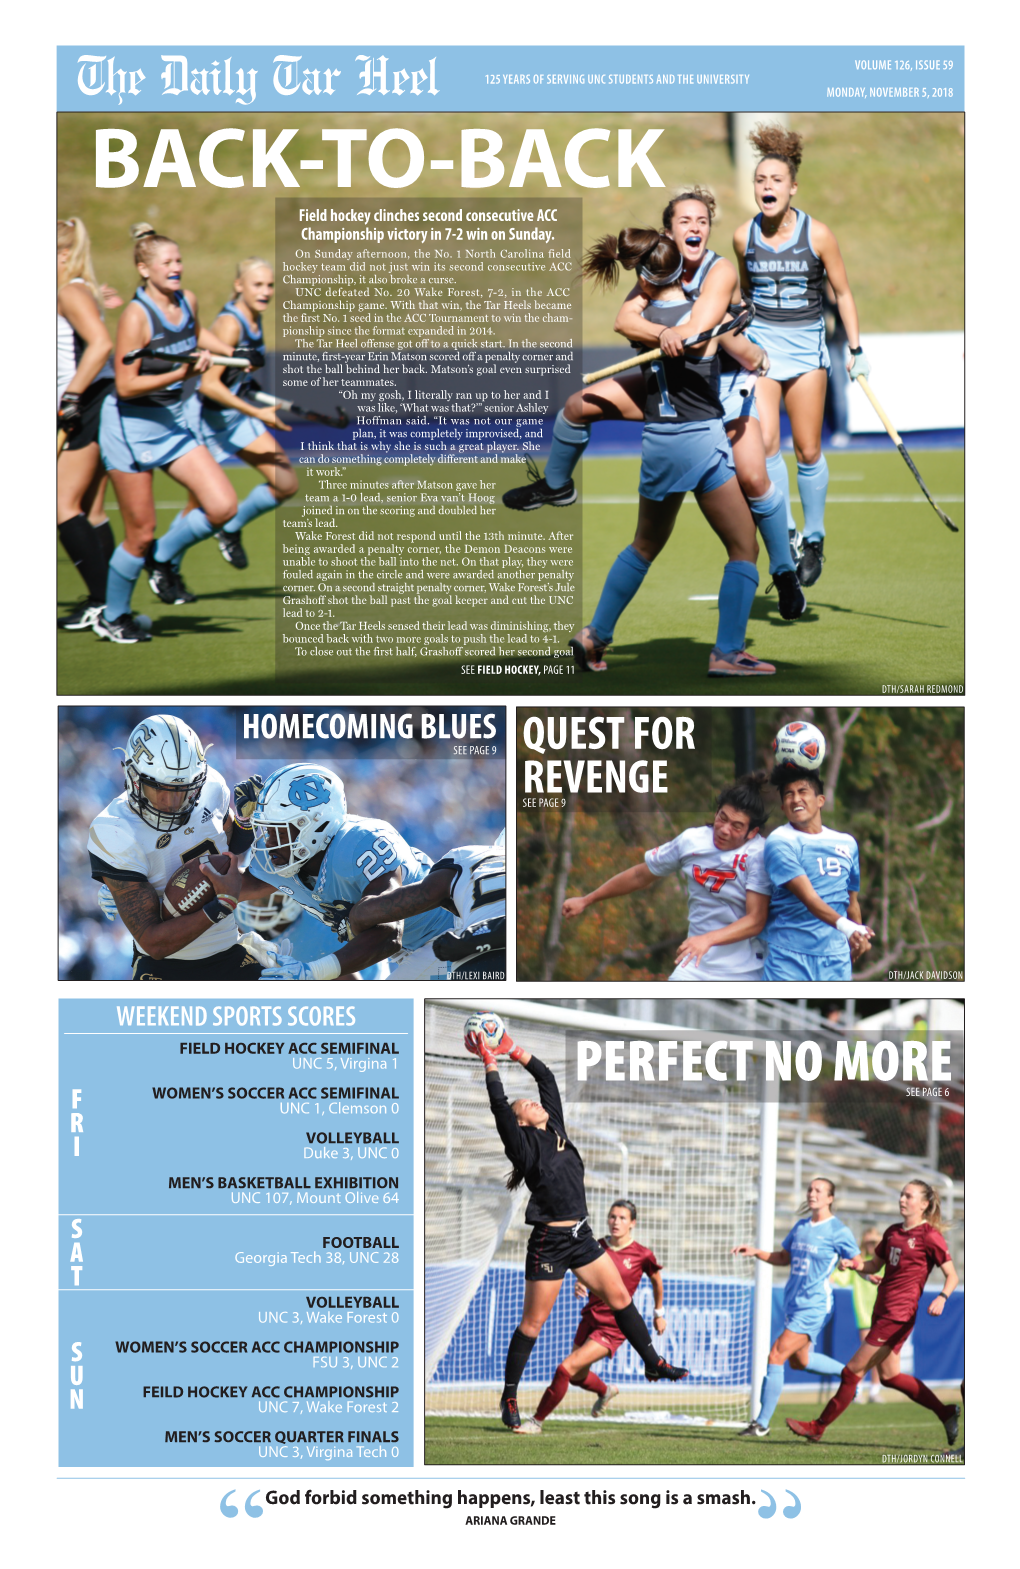 PERFECT NO MORE WOMEN’S SOCCER ACC SEMIFINAL SEE PAGE 6 F UNC 1, Clemson 0 R VOLLEYBALL I Duke 3, UNC 0 MEN’S BASKETBALL EXHIBITION UNC 107, Mount Olive 64